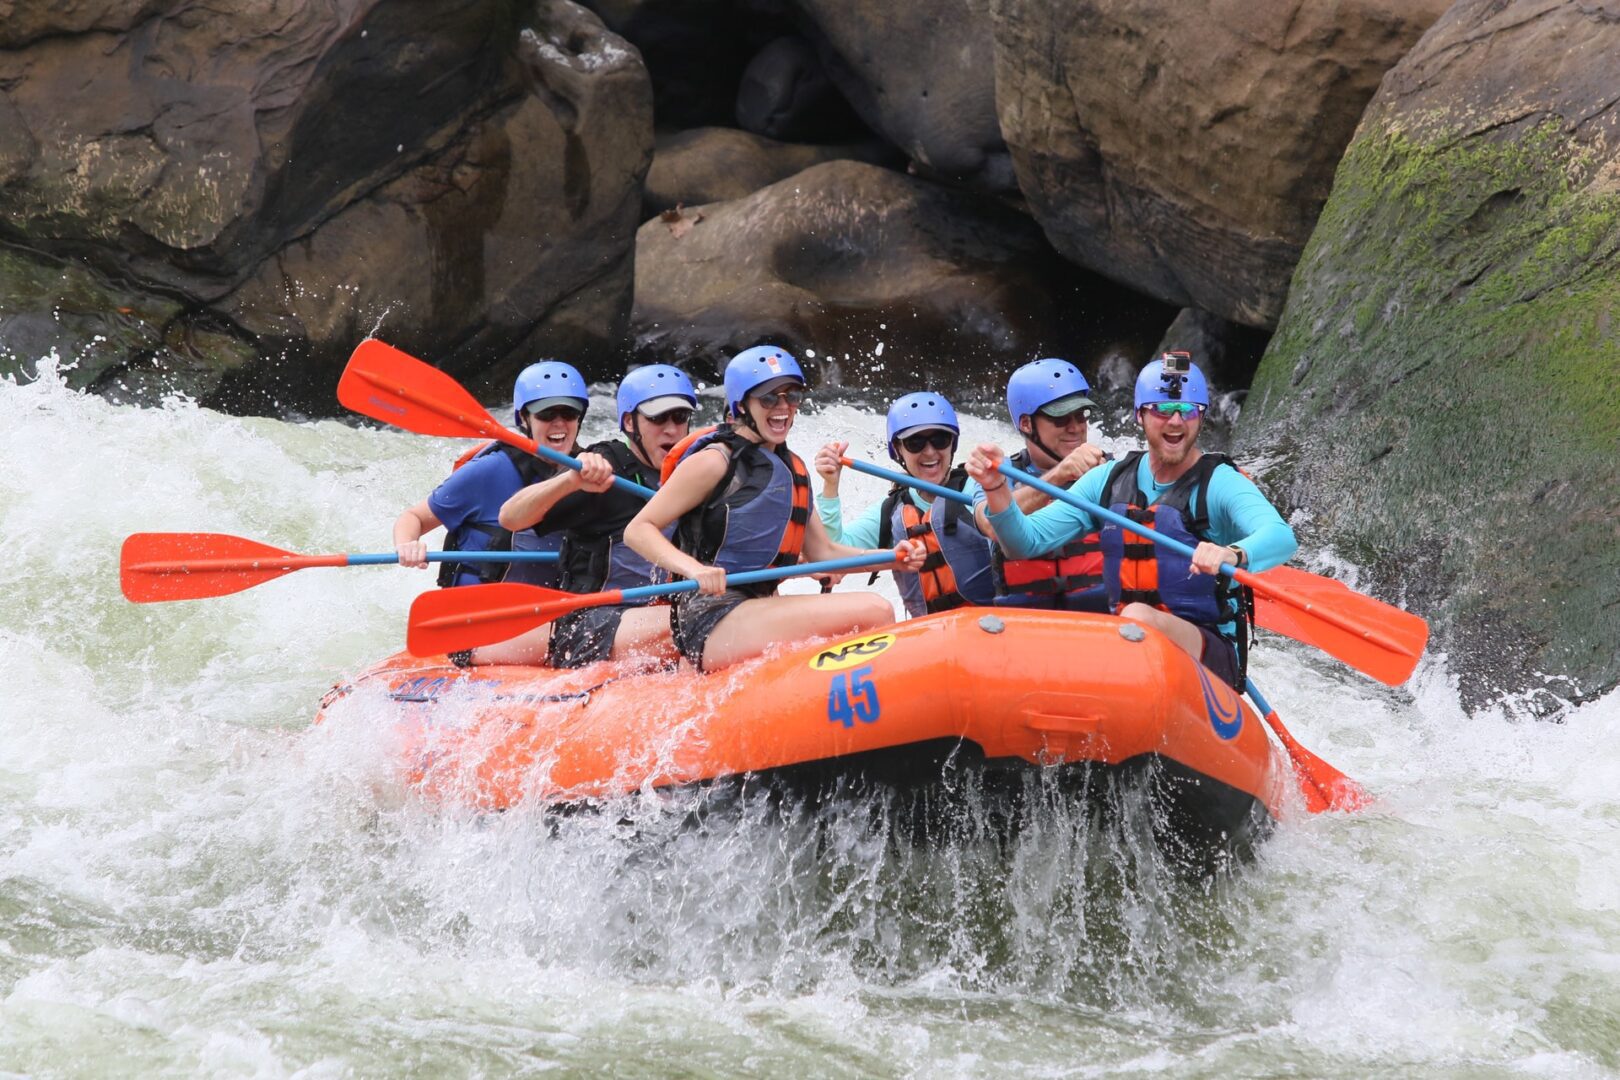 The picture depicts 6 men and women having a fun time navigating trechourous waters while white water rafting.